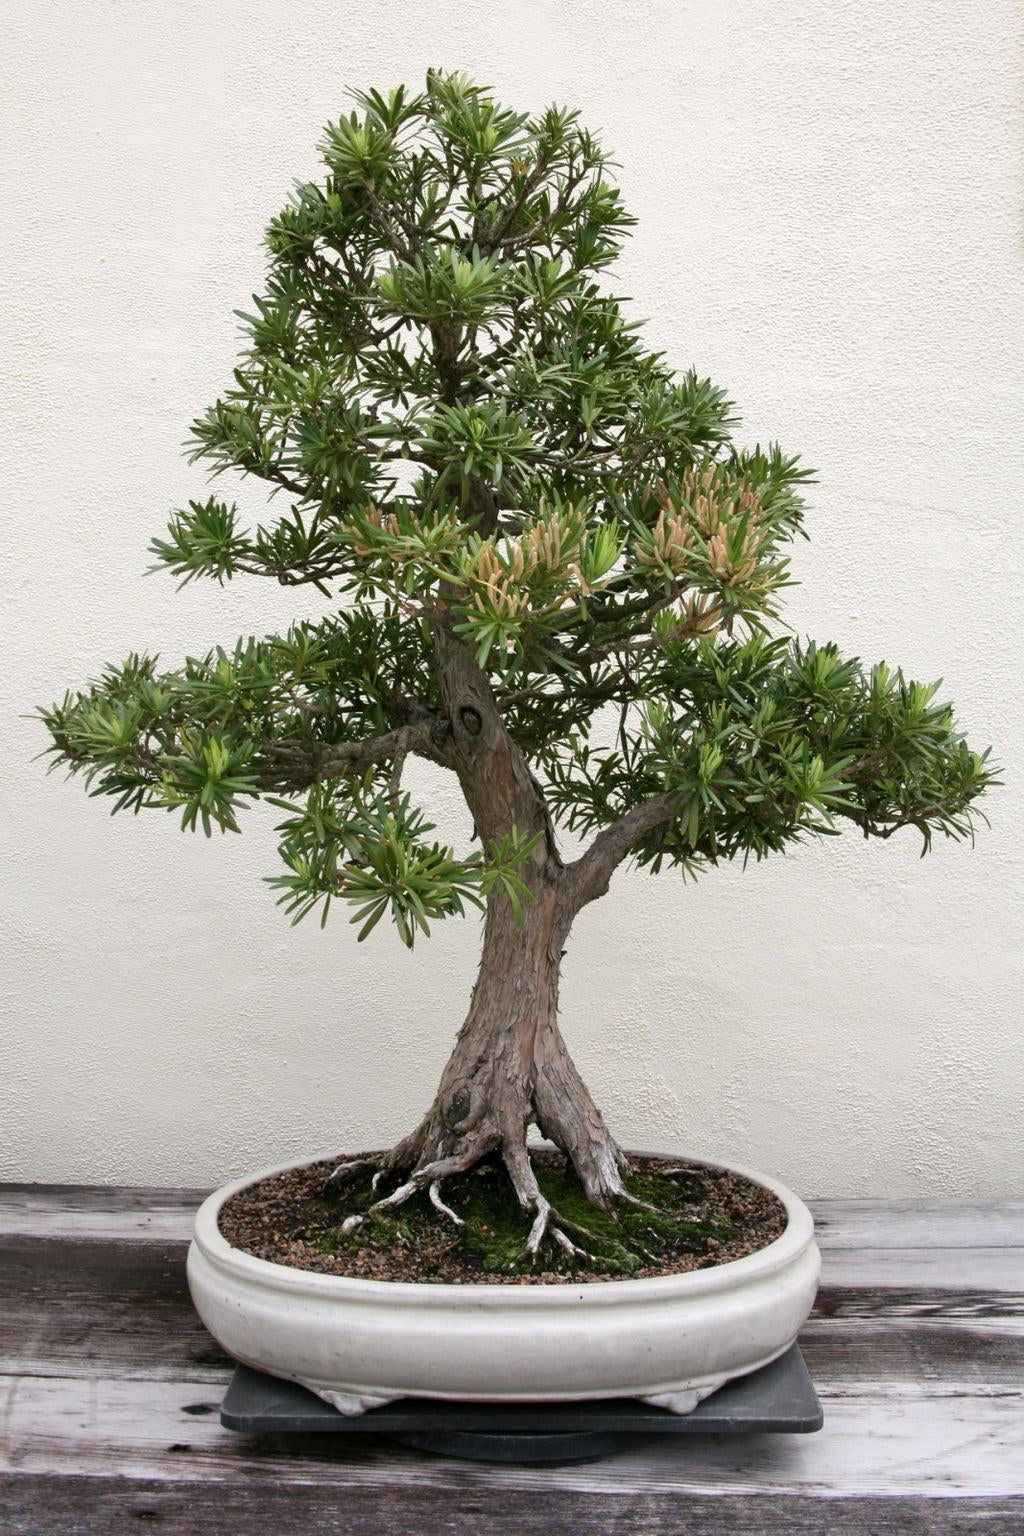 How To Take Care Of Your Buddhist Pine Bonsai Tree